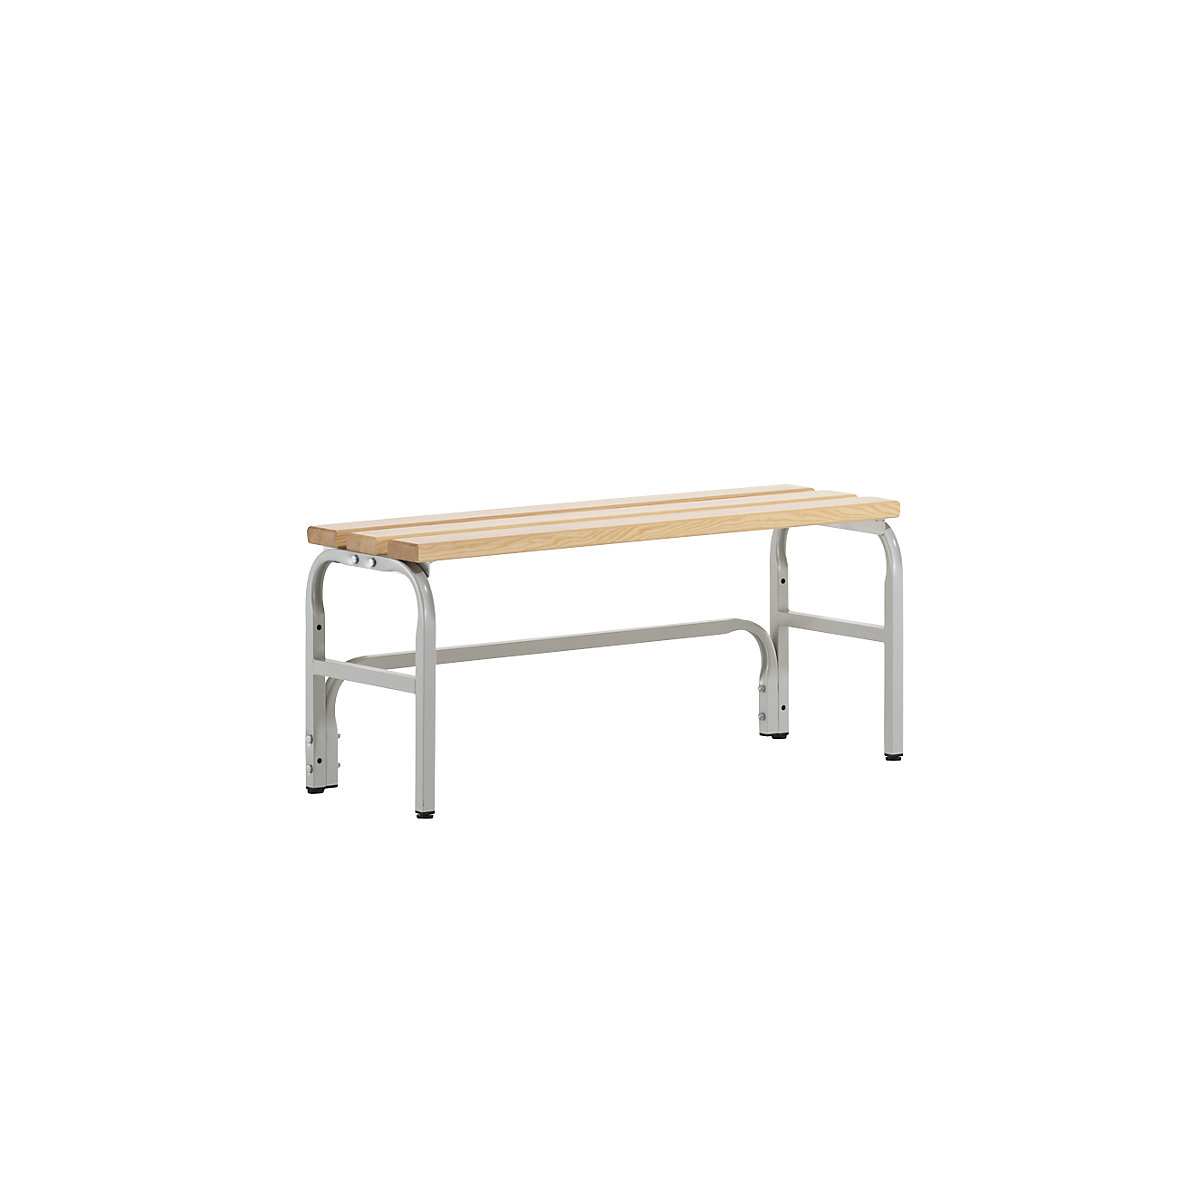 Cloakroom bench – Sypro